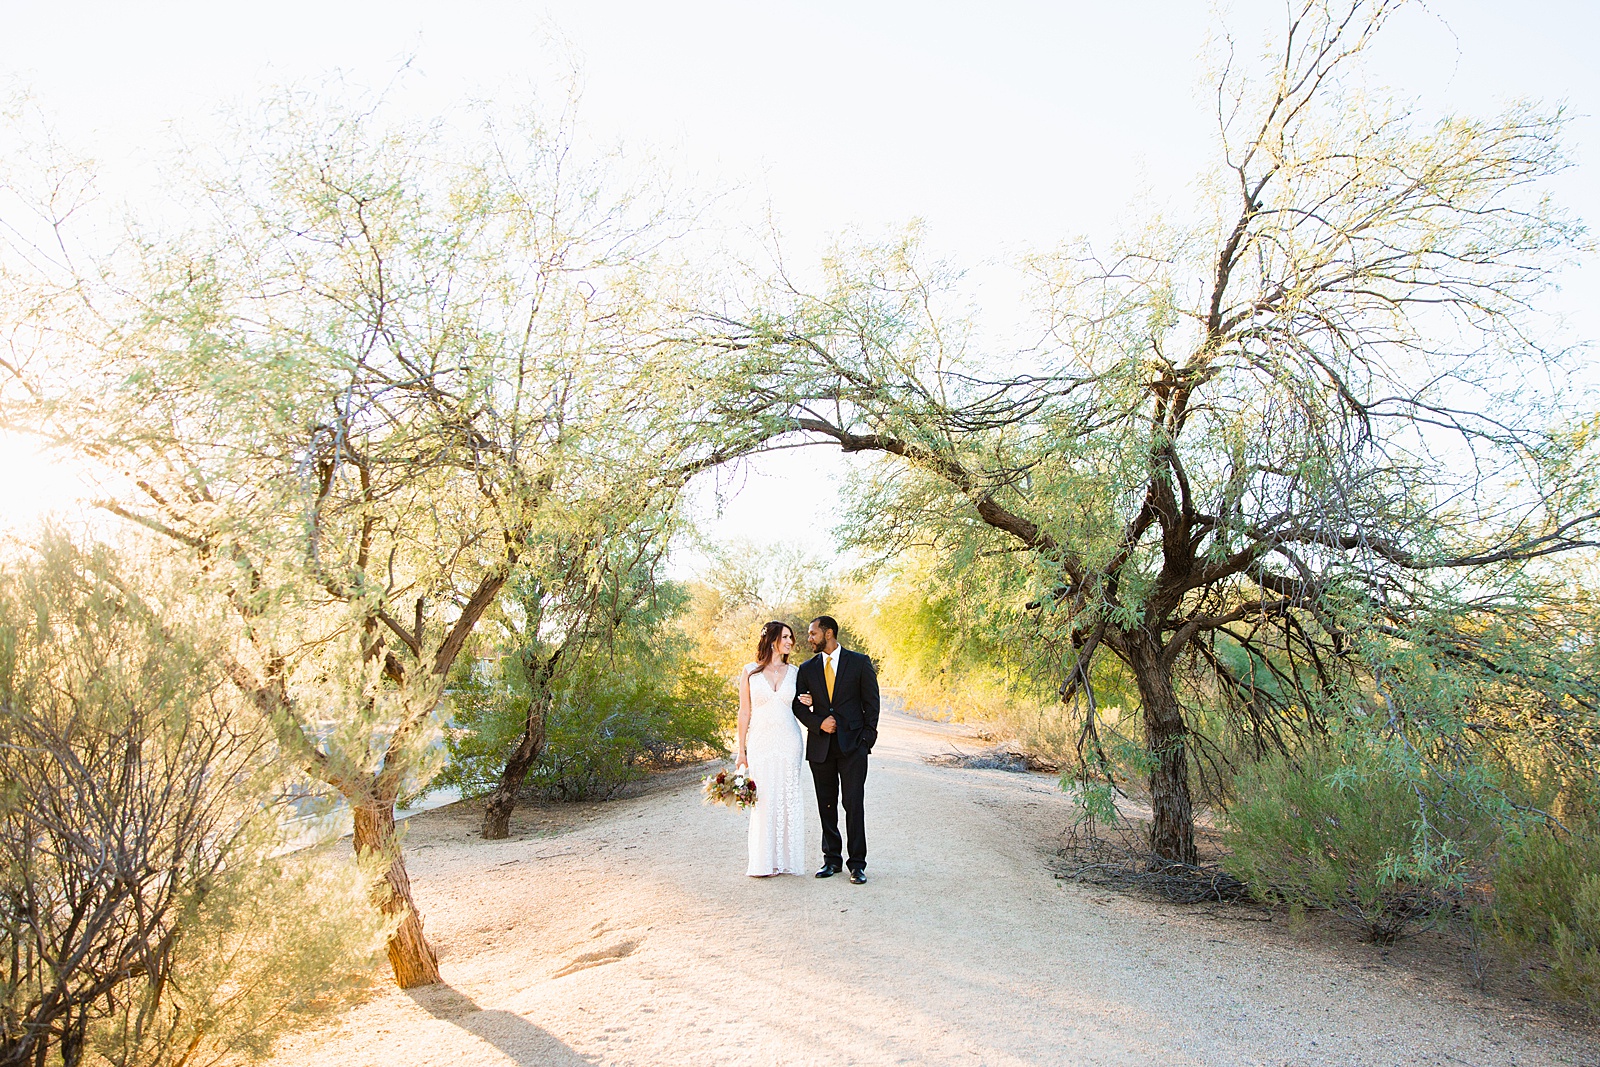 Bride and groom walking together during their Backyard Micro wedding by Scottsdale wedding photographer PMA Photography.